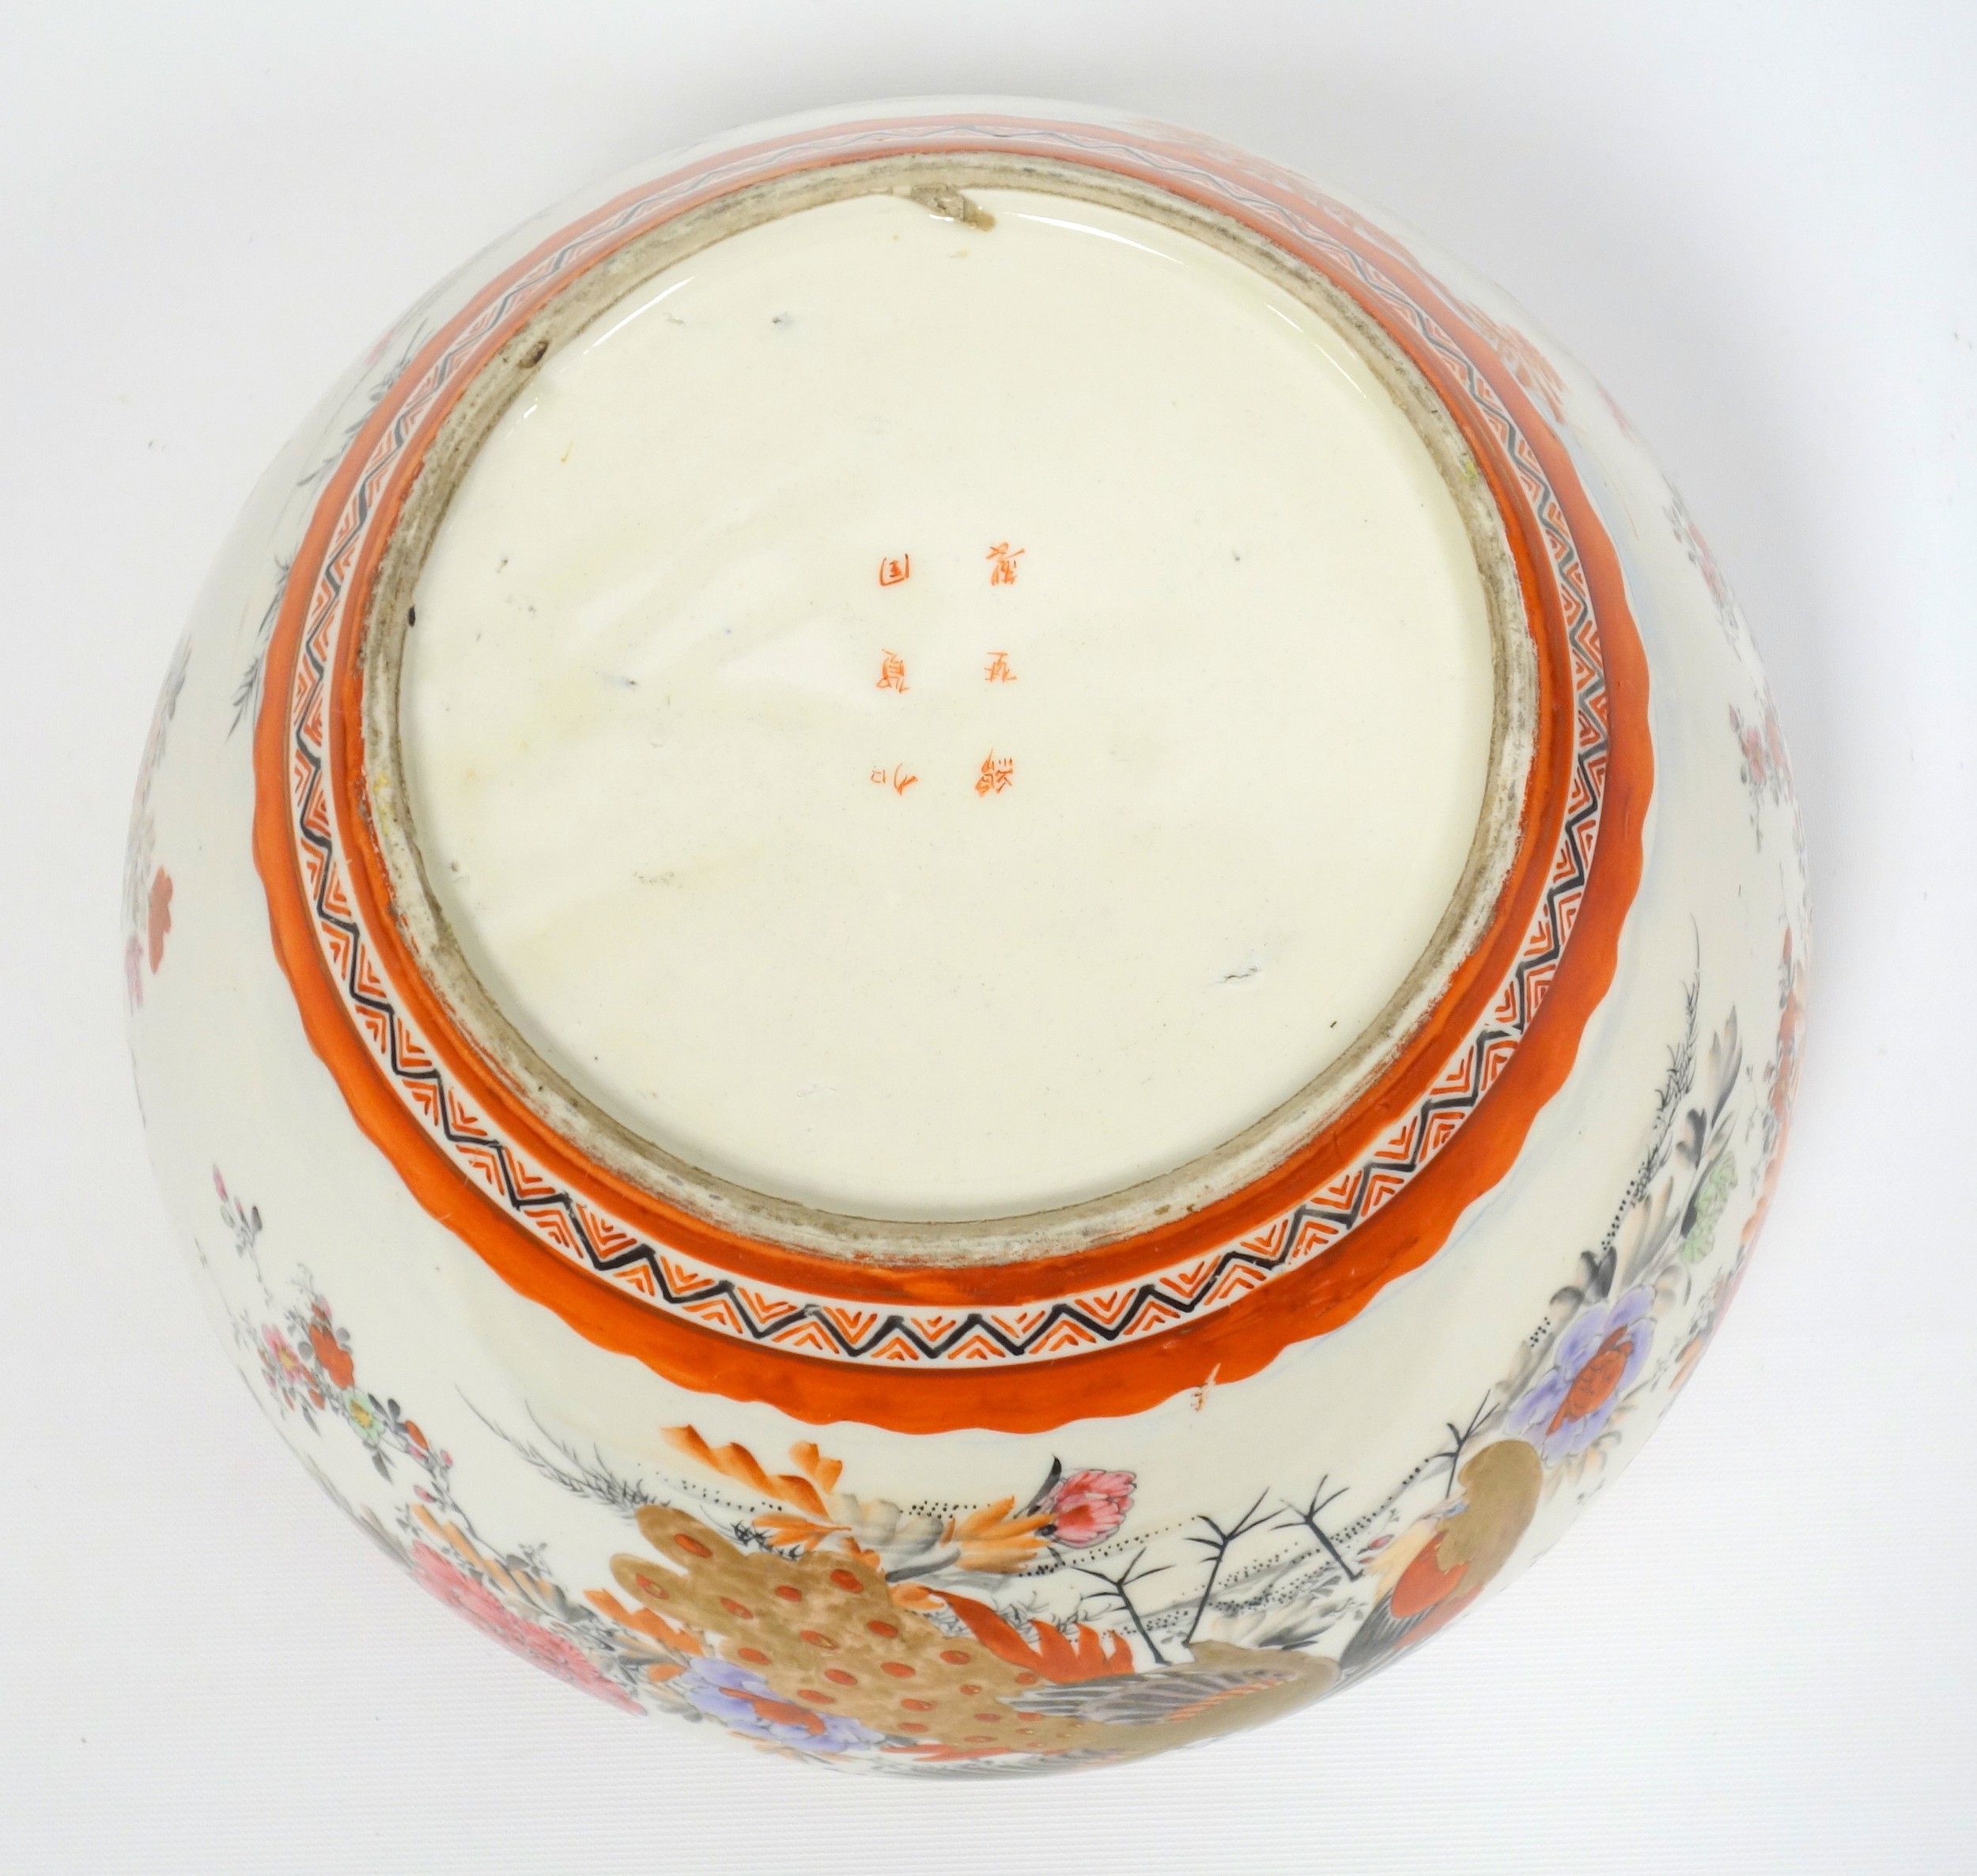 Late 19th century Japanese Kutani porcelain circular bowl painted with peacocks, other birds and - Image 6 of 7